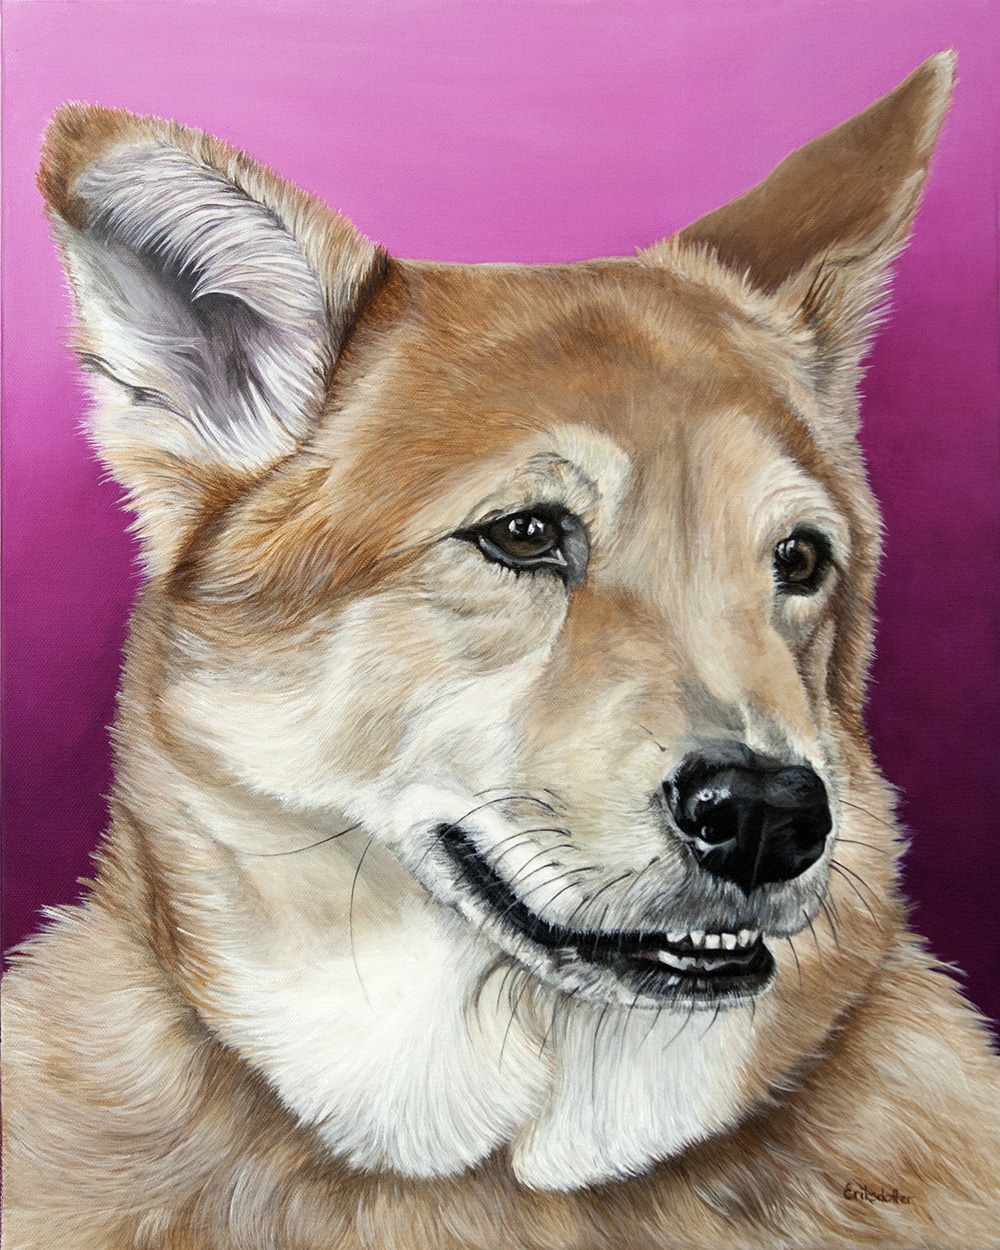 Custom dog portrait of a german sheperd and chow mix dog by fine arts painter Erica Eriksdotter